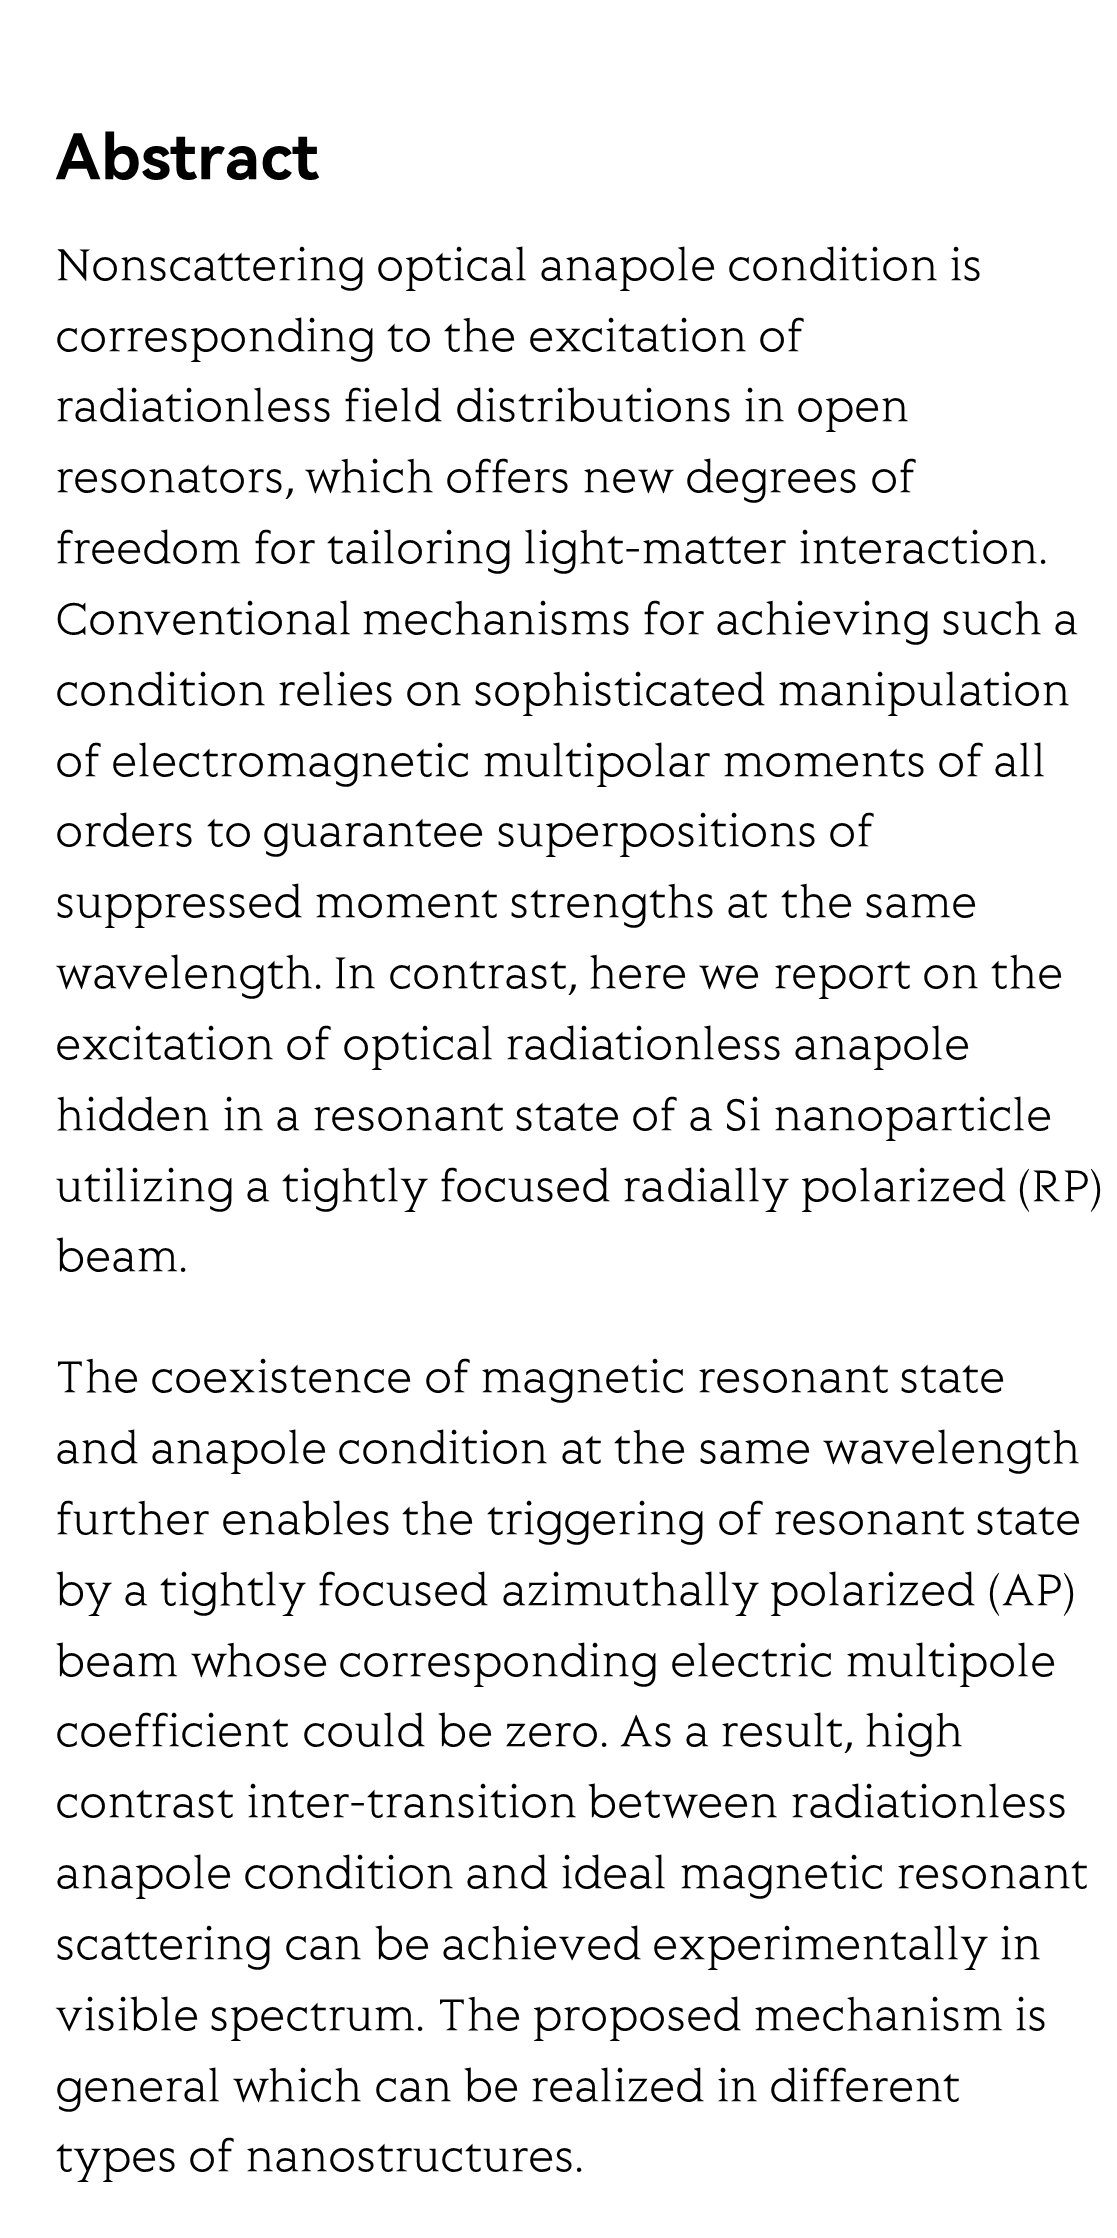 Cylindrical vector beams reveal radiationless anapole condition in a resonant state_2